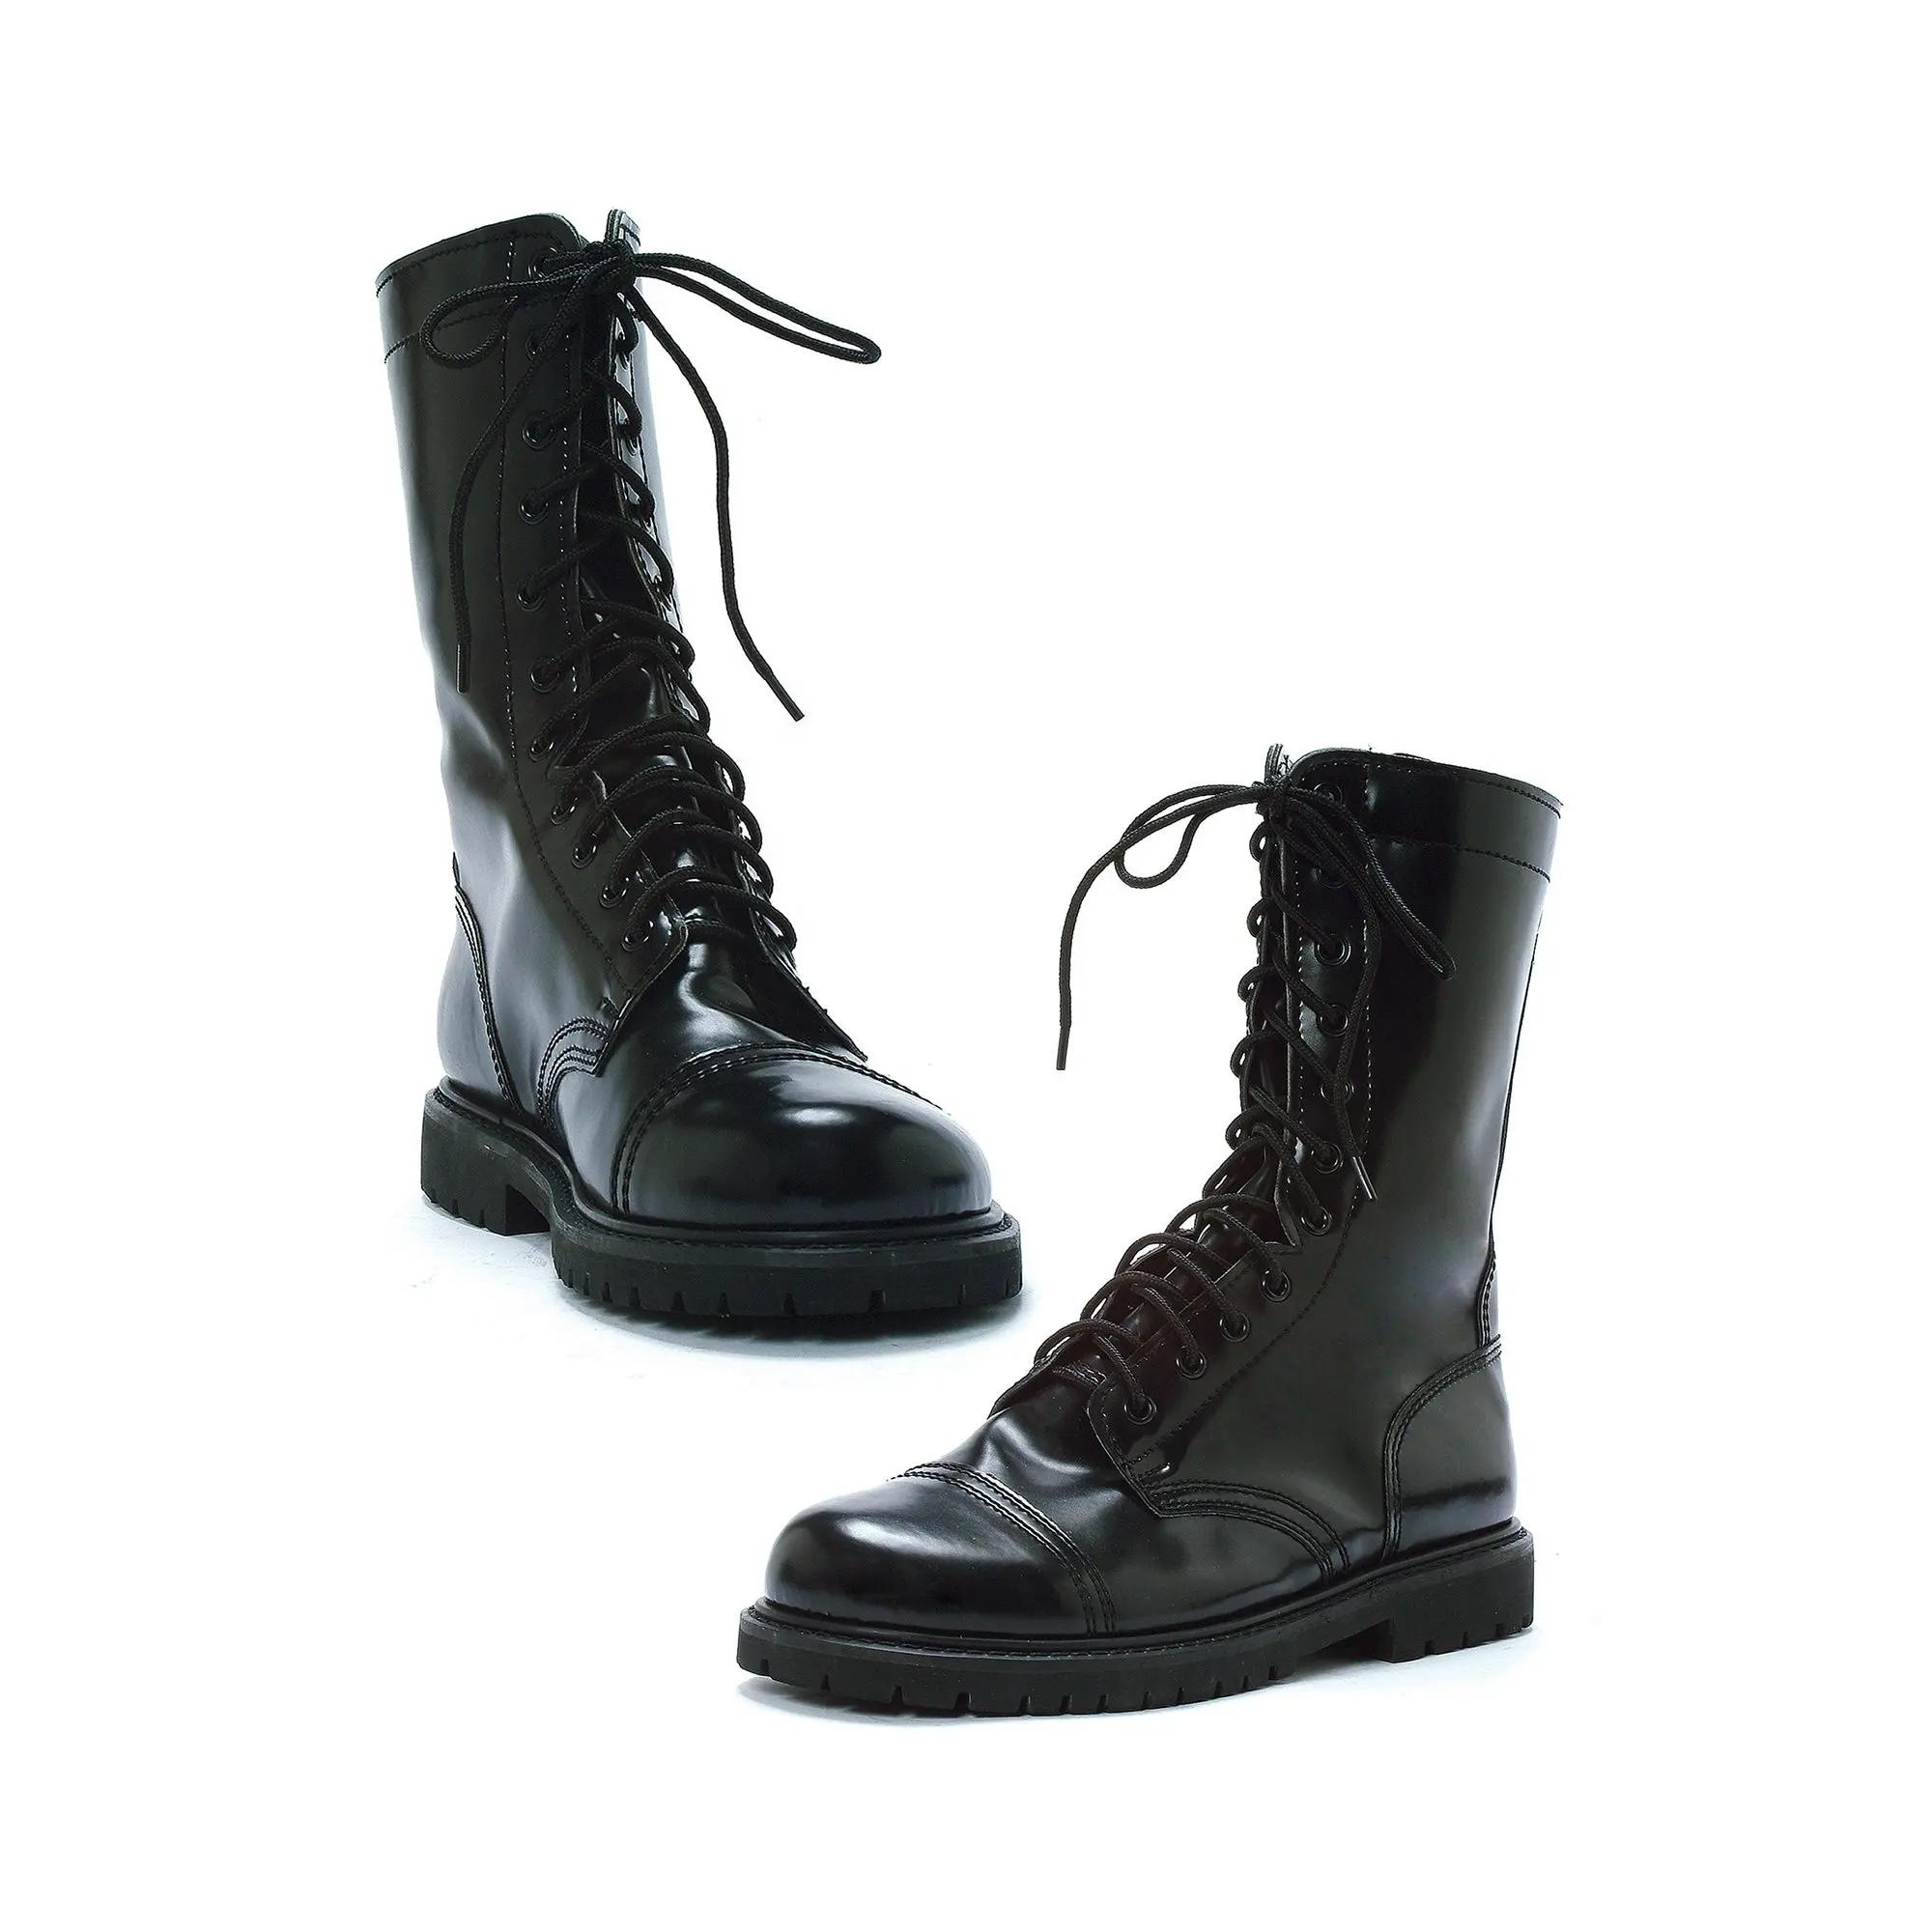 where to buy combat boots near me